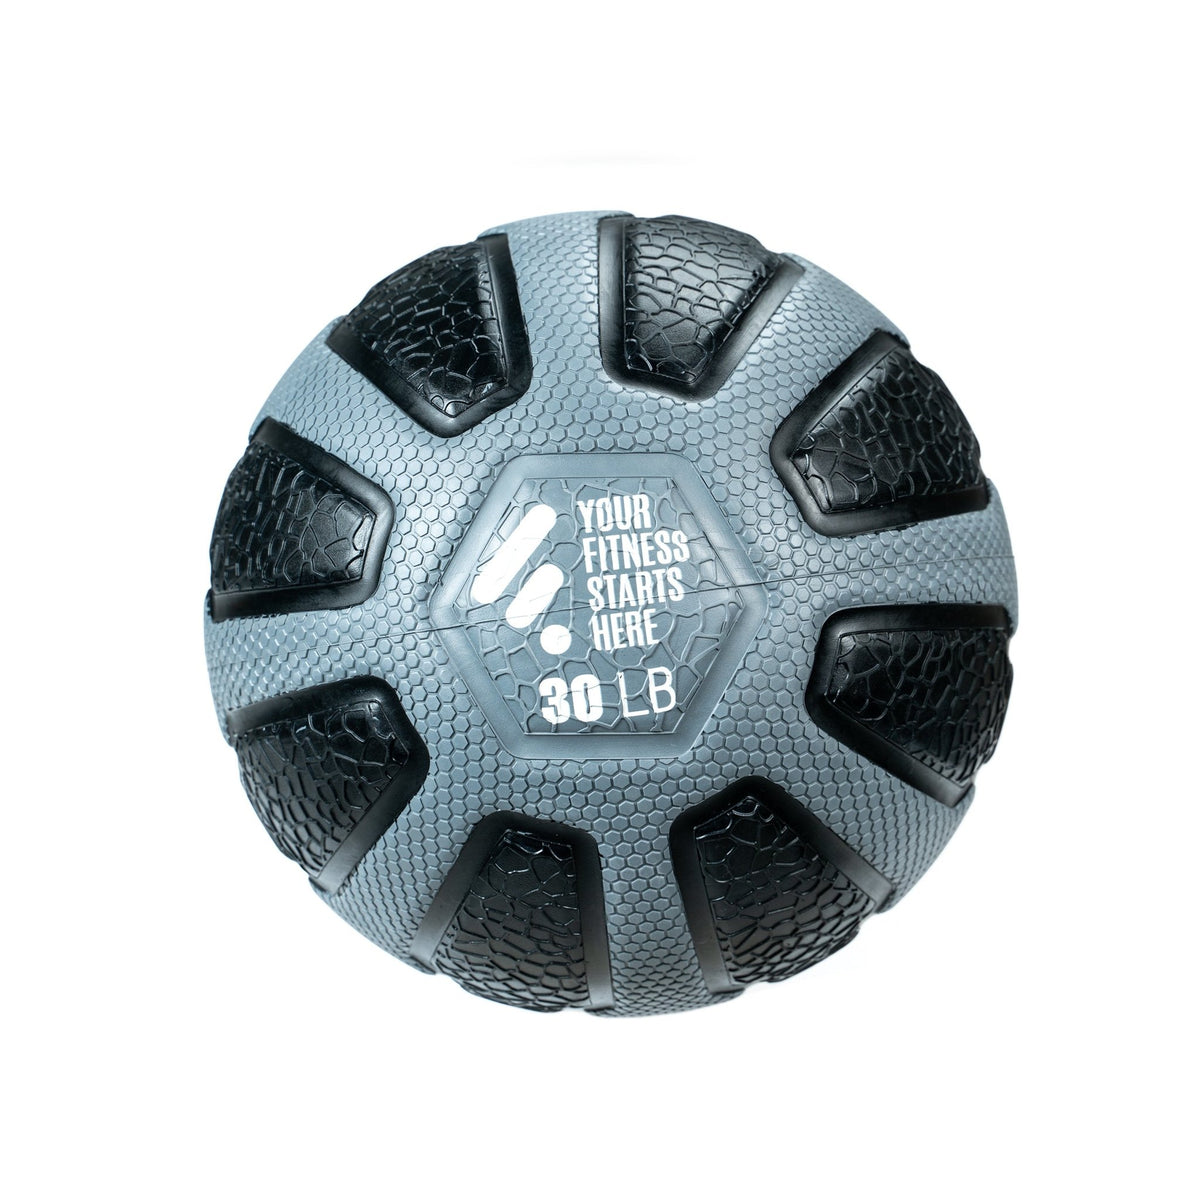 FitWay Equip. Max Grip Medicine Ball - 30 Lbs - Fitness Experience